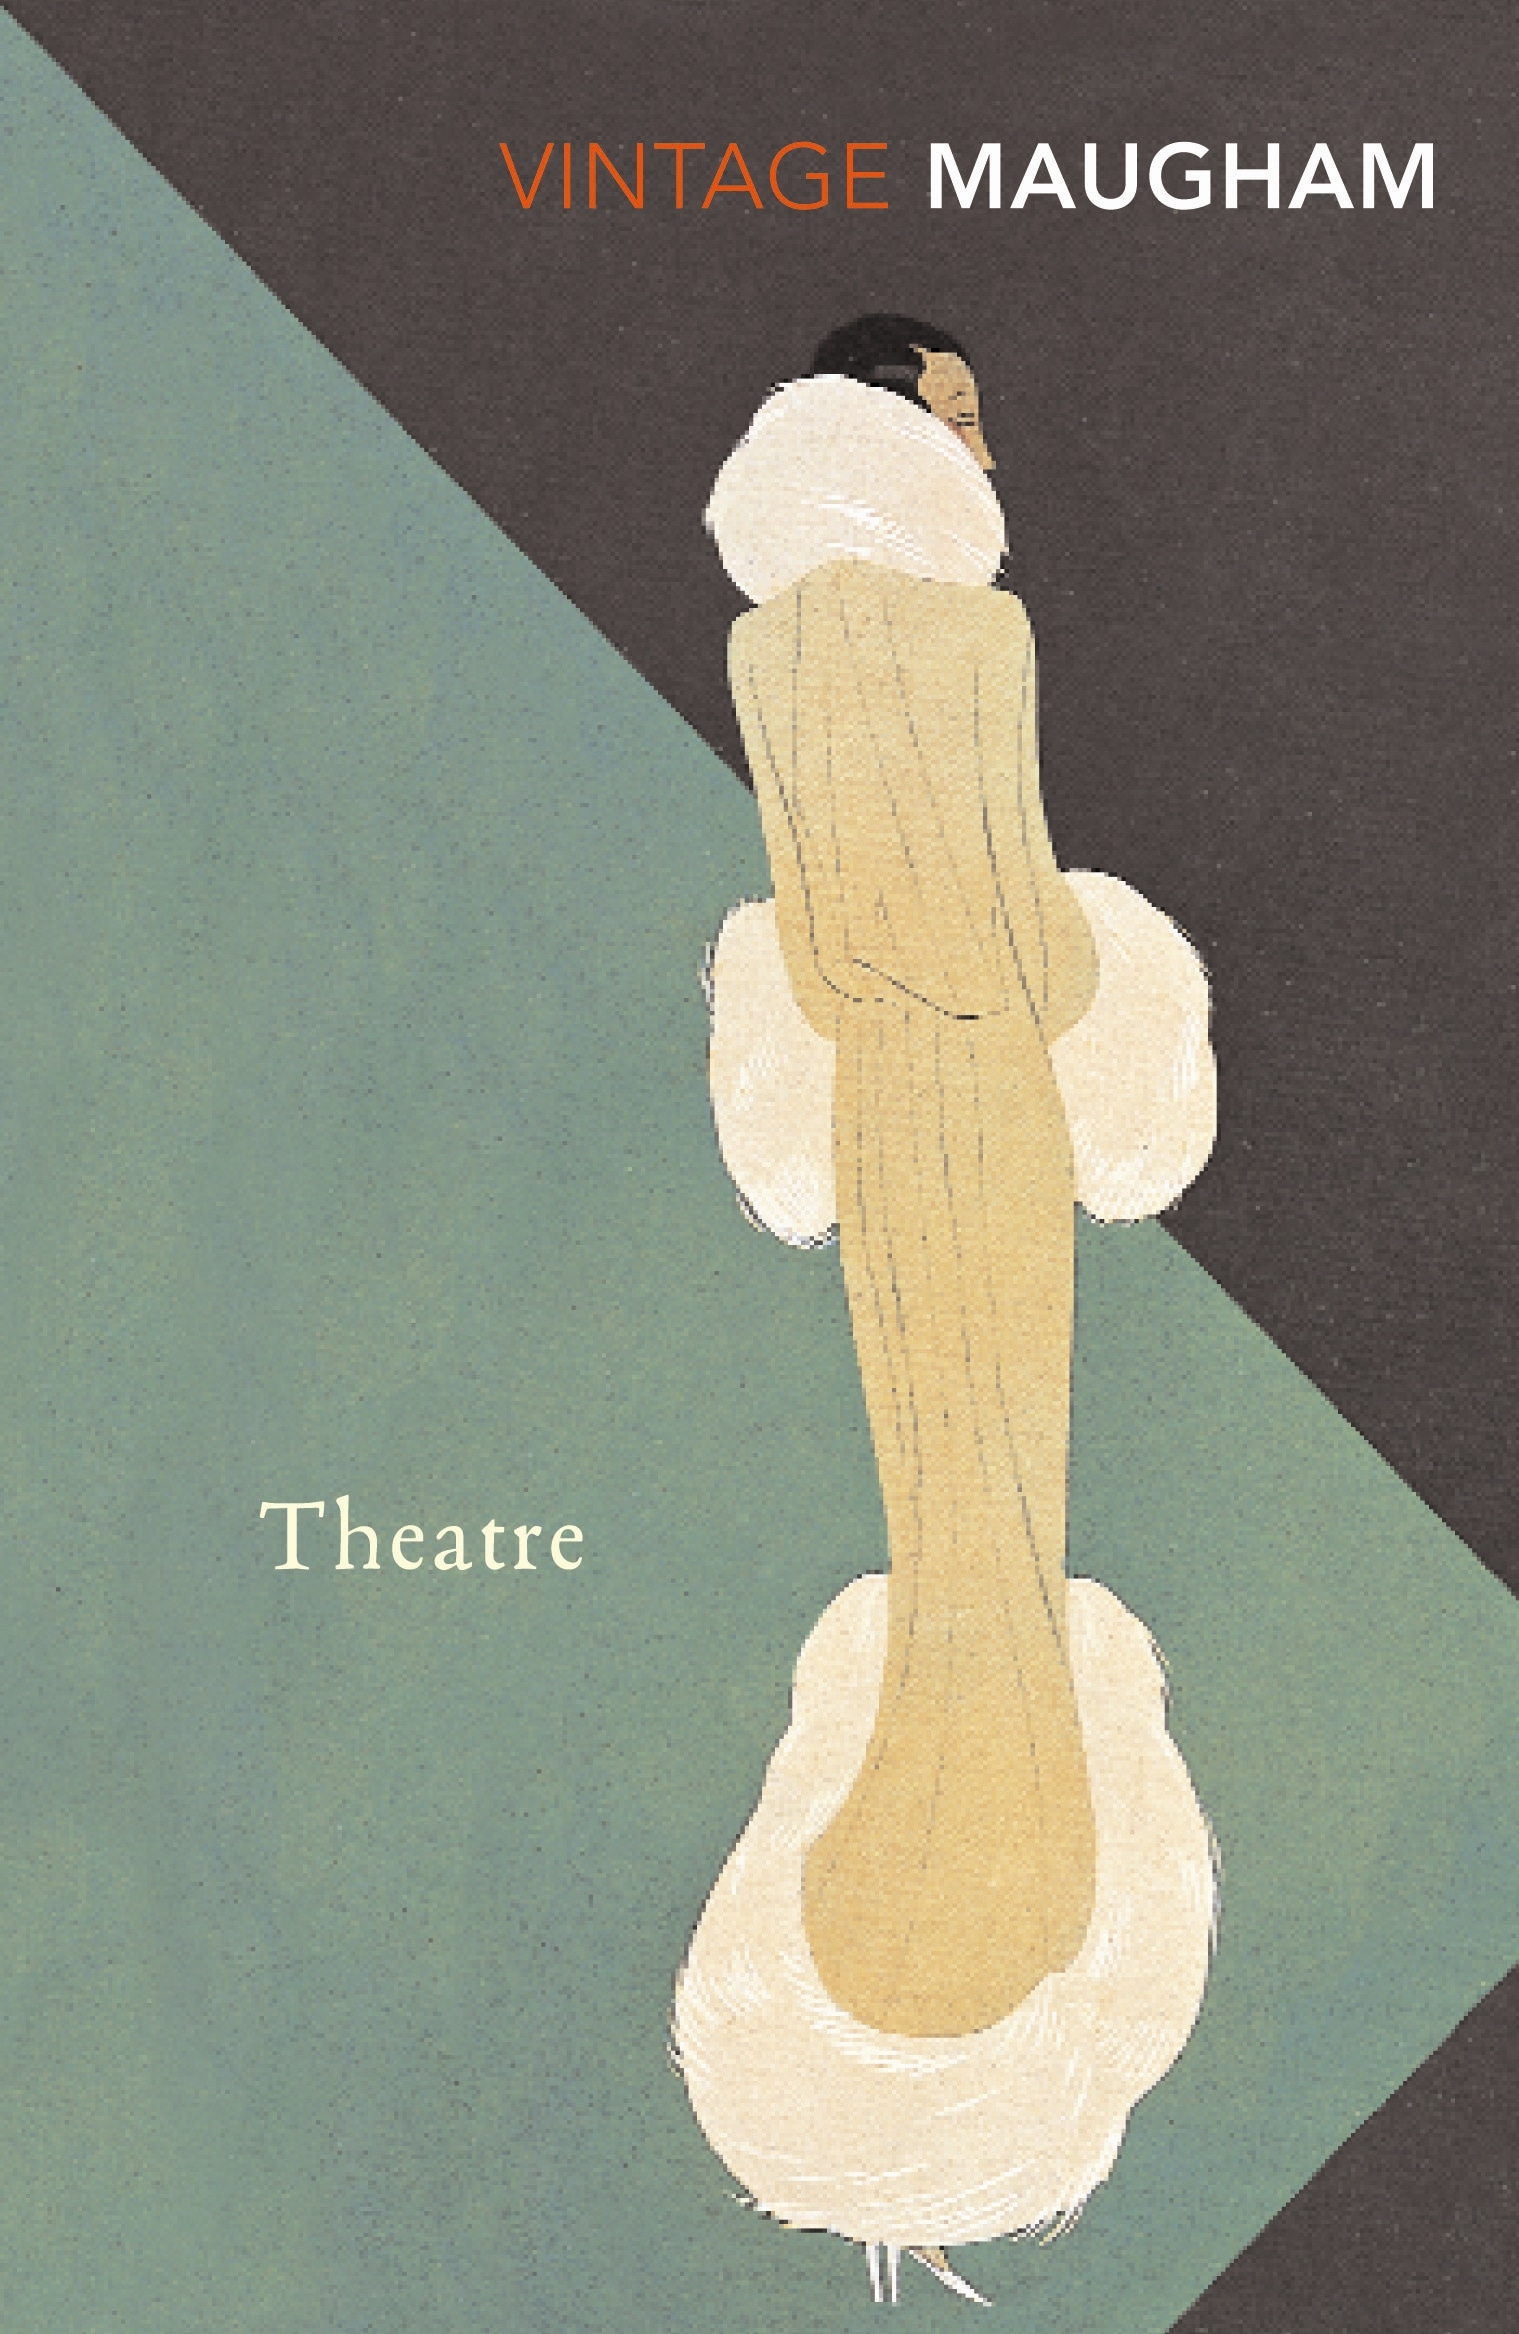 Book “Theatre” by W. Somerset Maugham — June 1, 2001